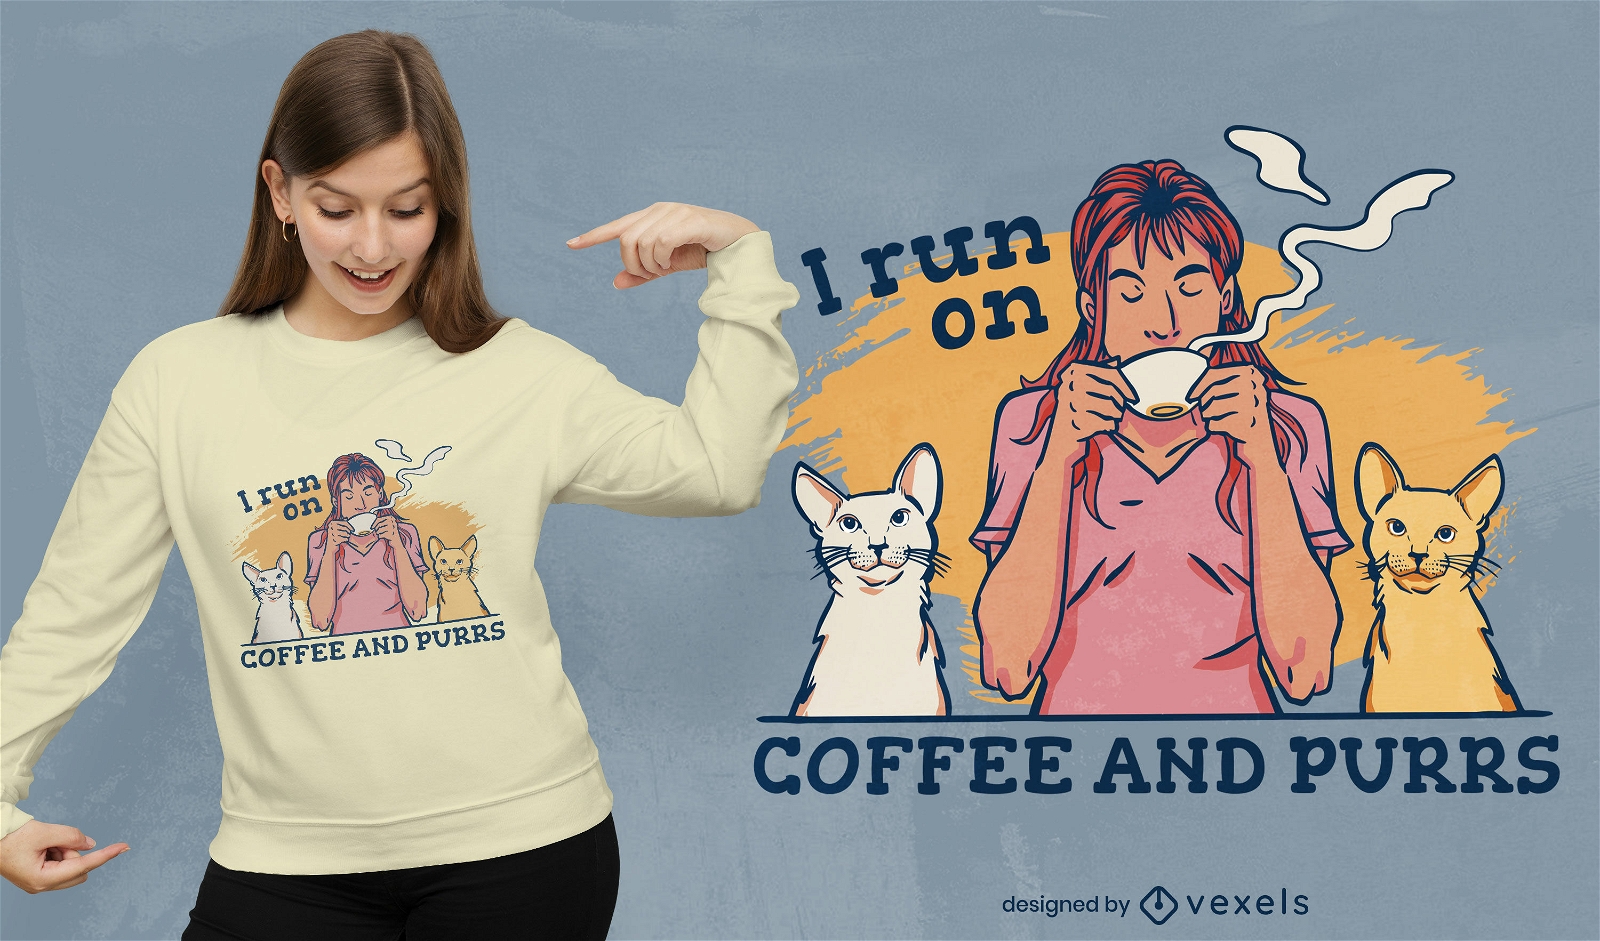 Cool coffee and purrs cats quote t-shirt design